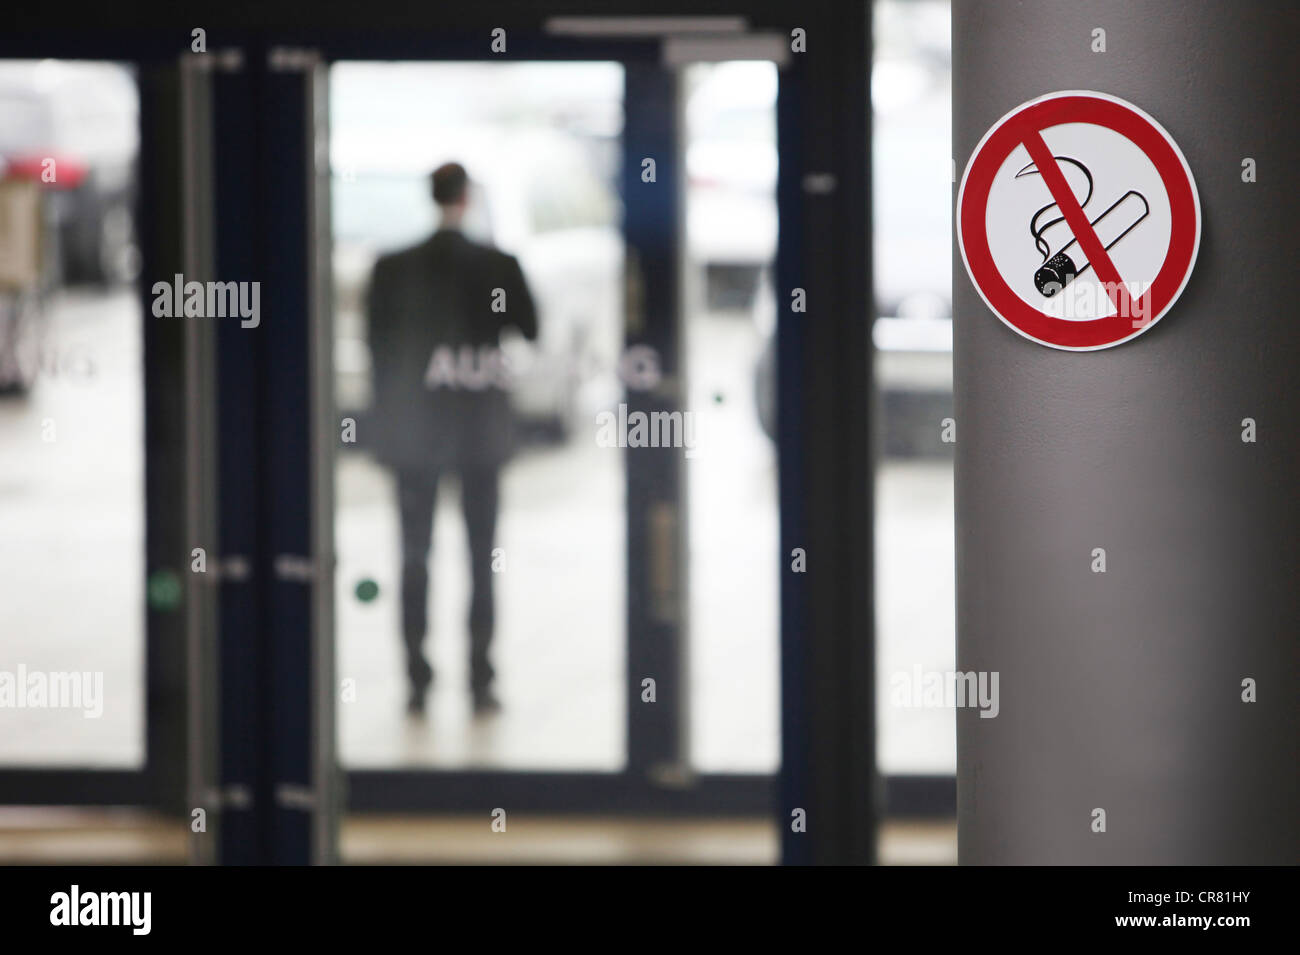 No smoking sign and a man smoking in front of an office building Stock Photo